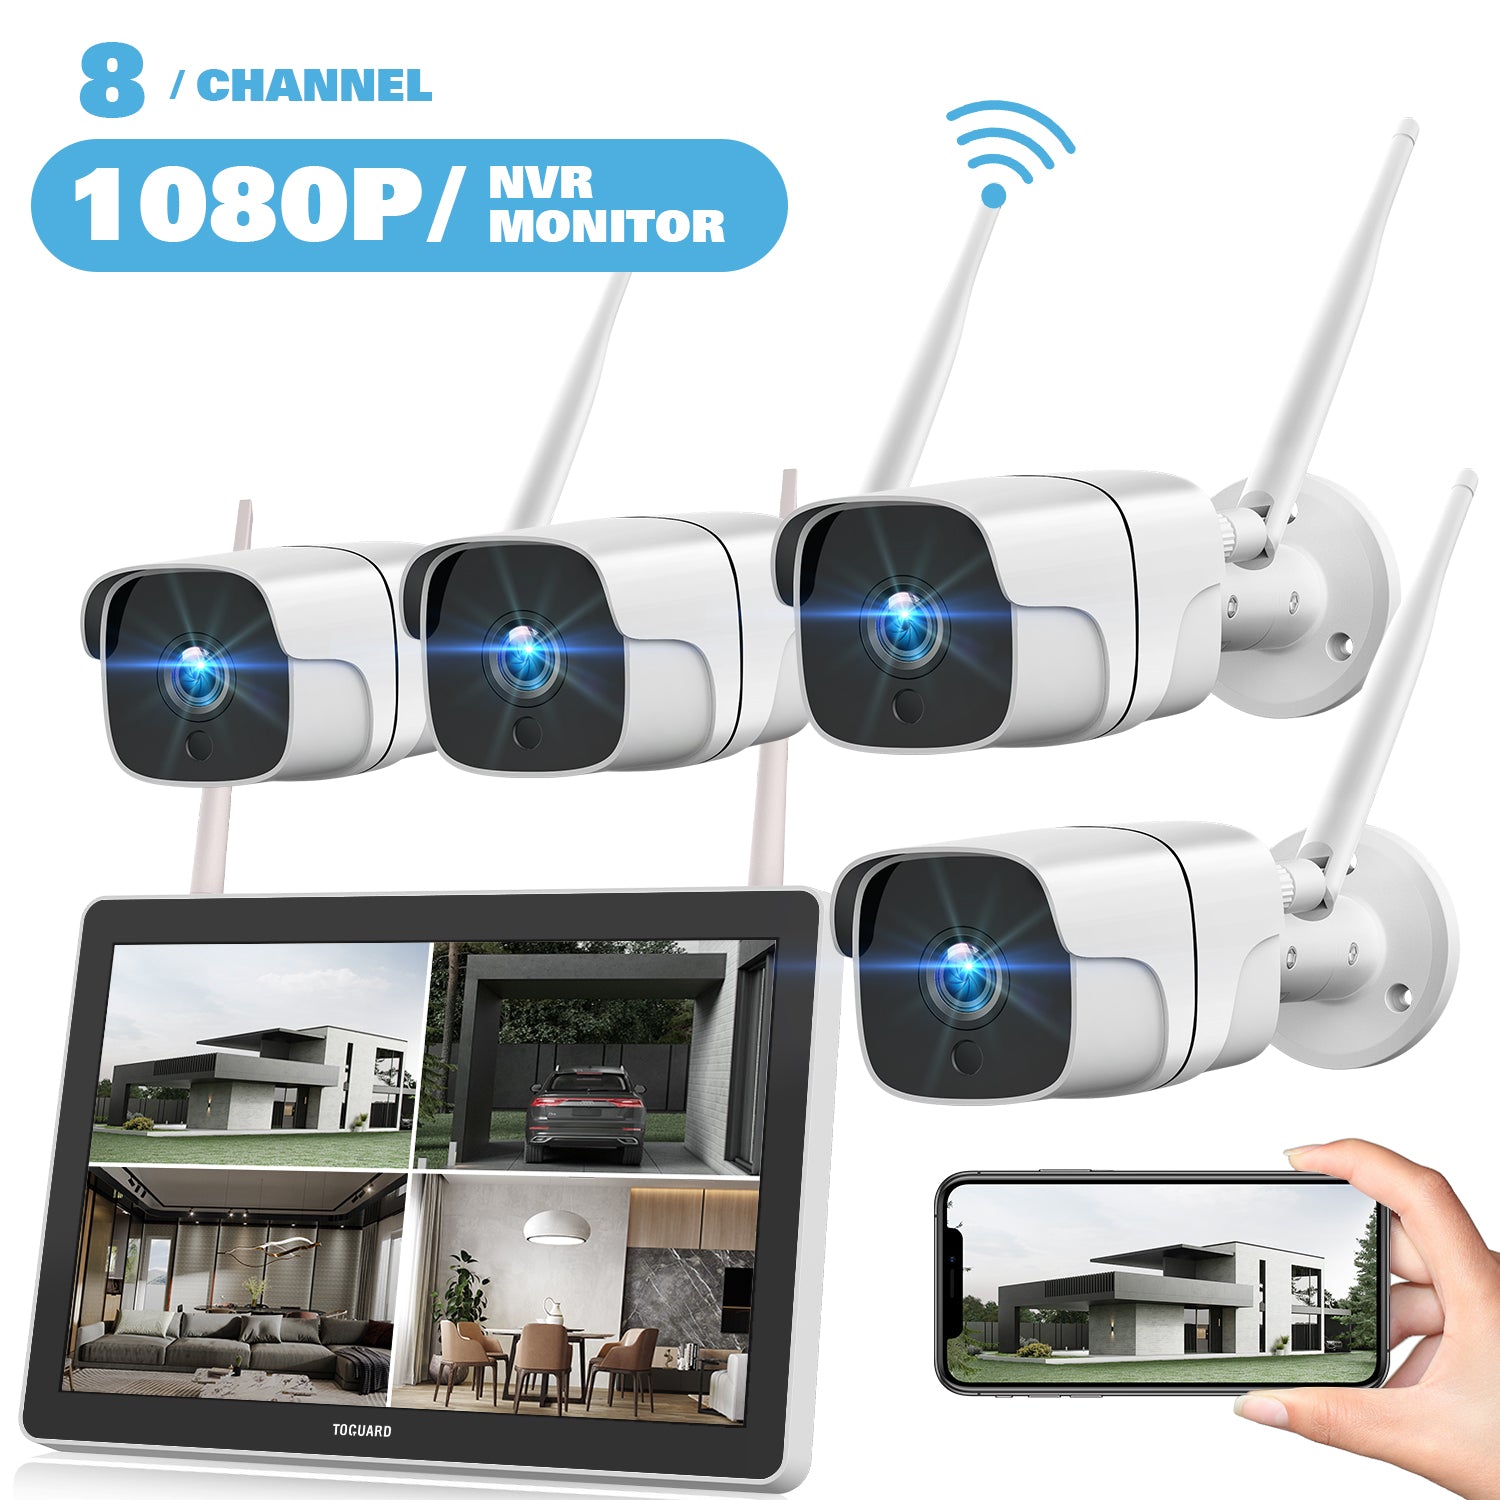 Toguard W400 4Pcs 1080P 8CH NVR Wireless Security Camera System with 12 inch LCD Monitor &  3TB Hard Drive (Out of stock in Australia)